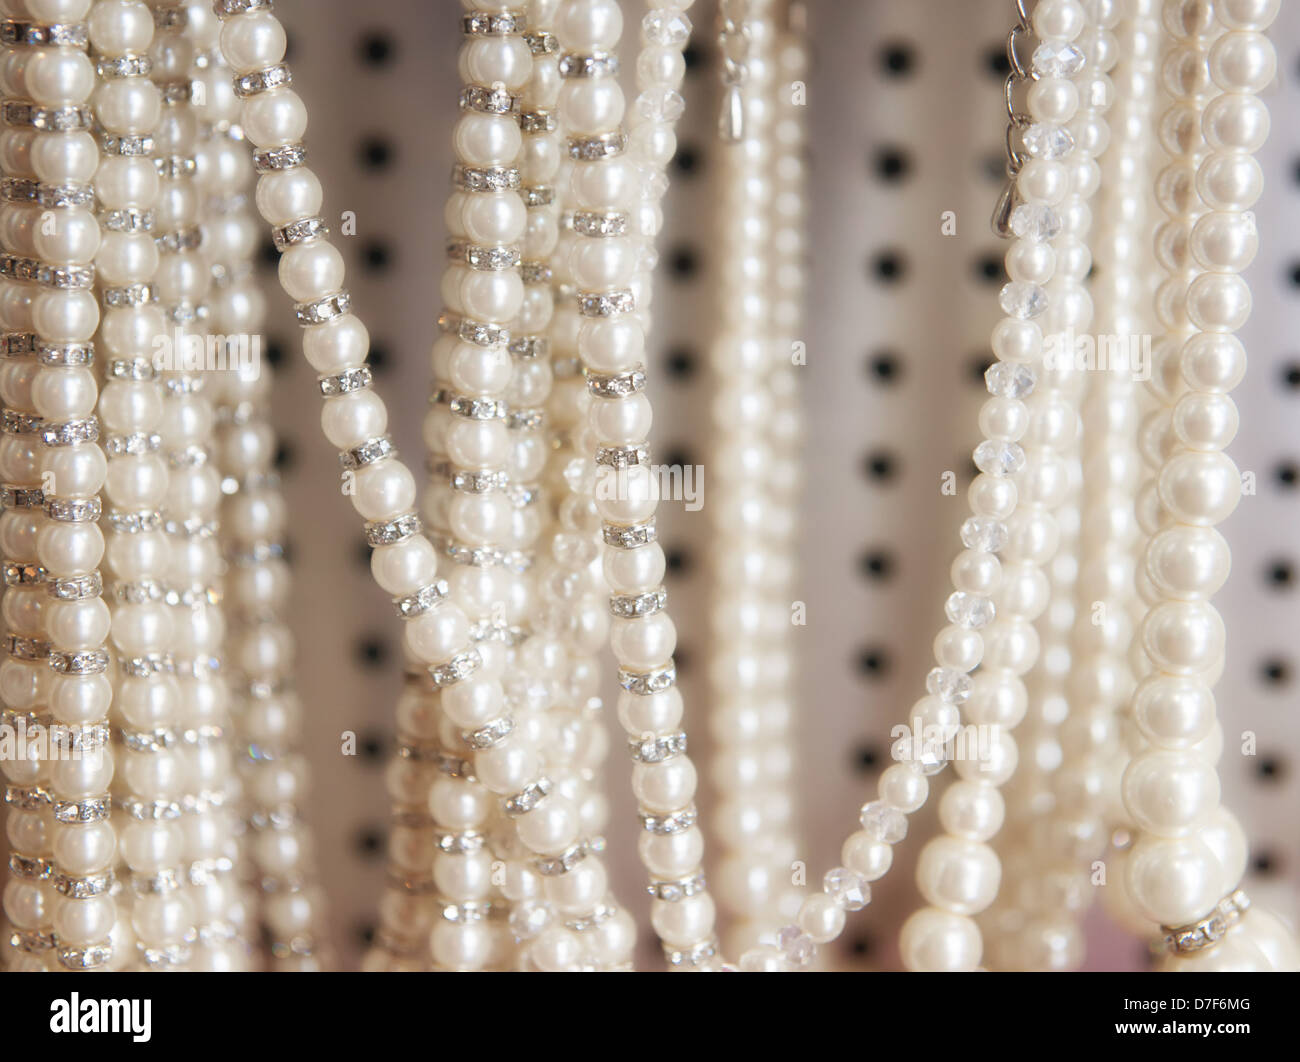 fake pearl necklaces hanging for sale in shop Stock Photo